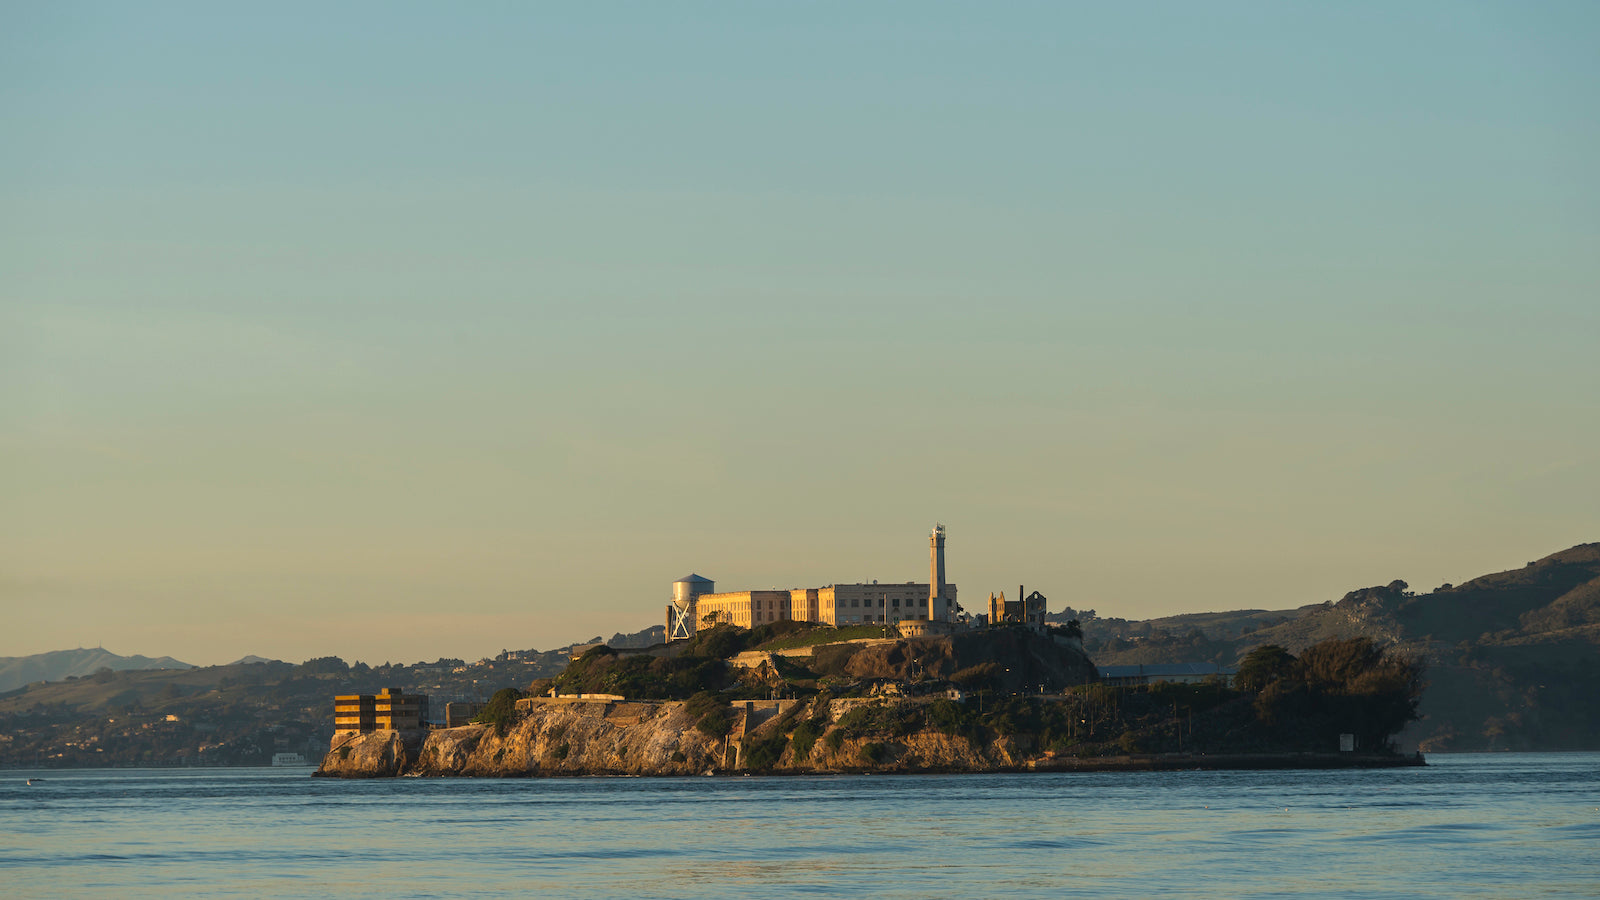 Alcatraz island in the late afternoon sun, surrounded by the blue waters of San Francisco Bay